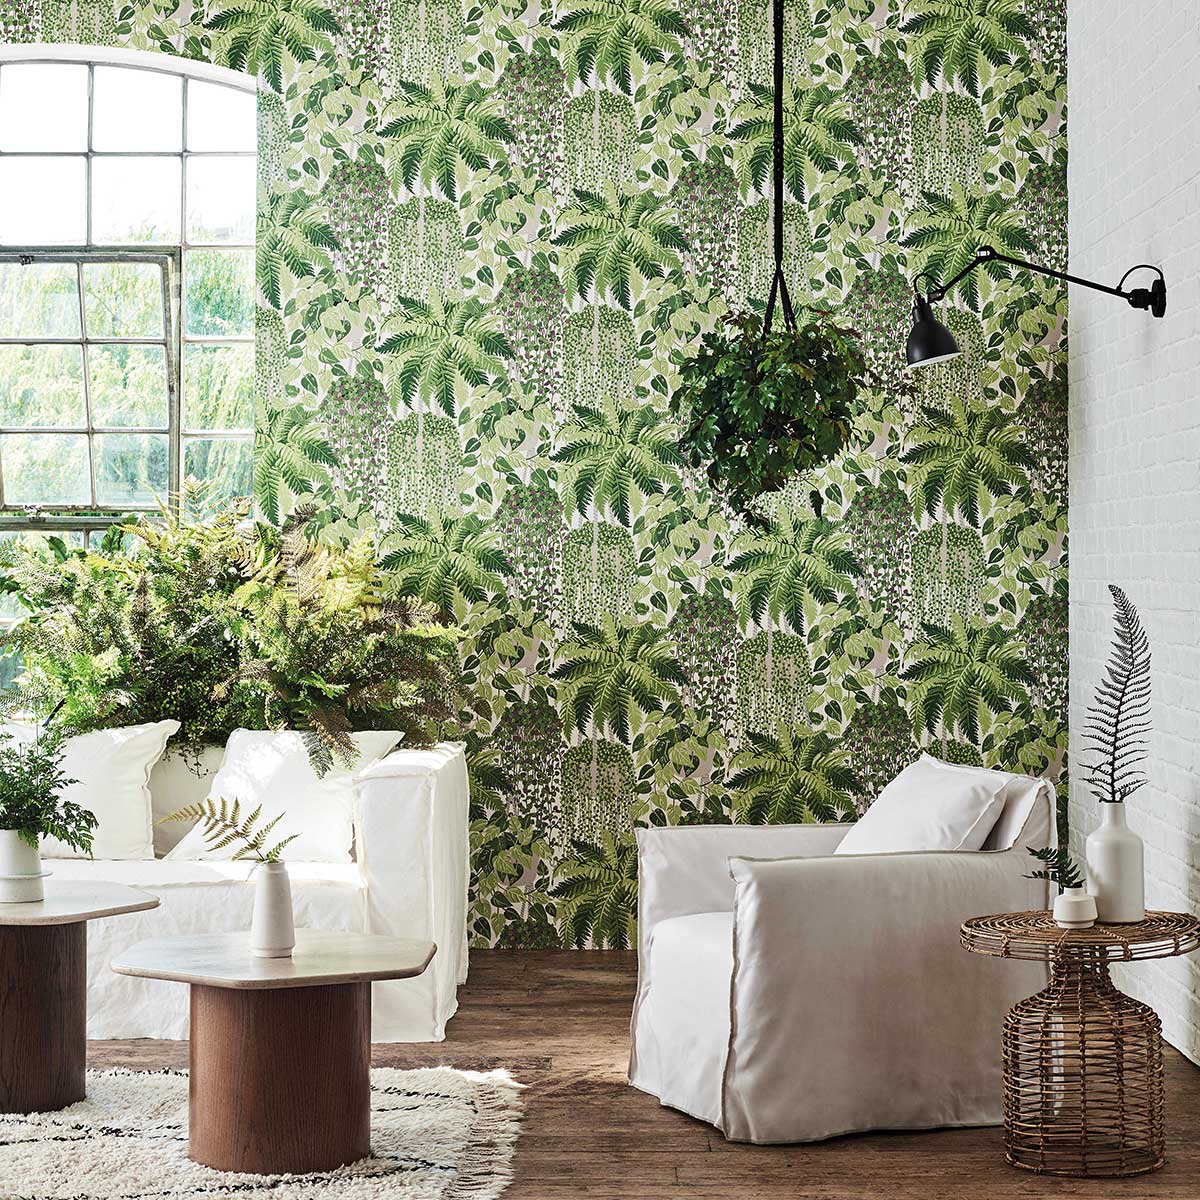 Fern Wallpaper - Leaf Green / Olive - by Cole & Son